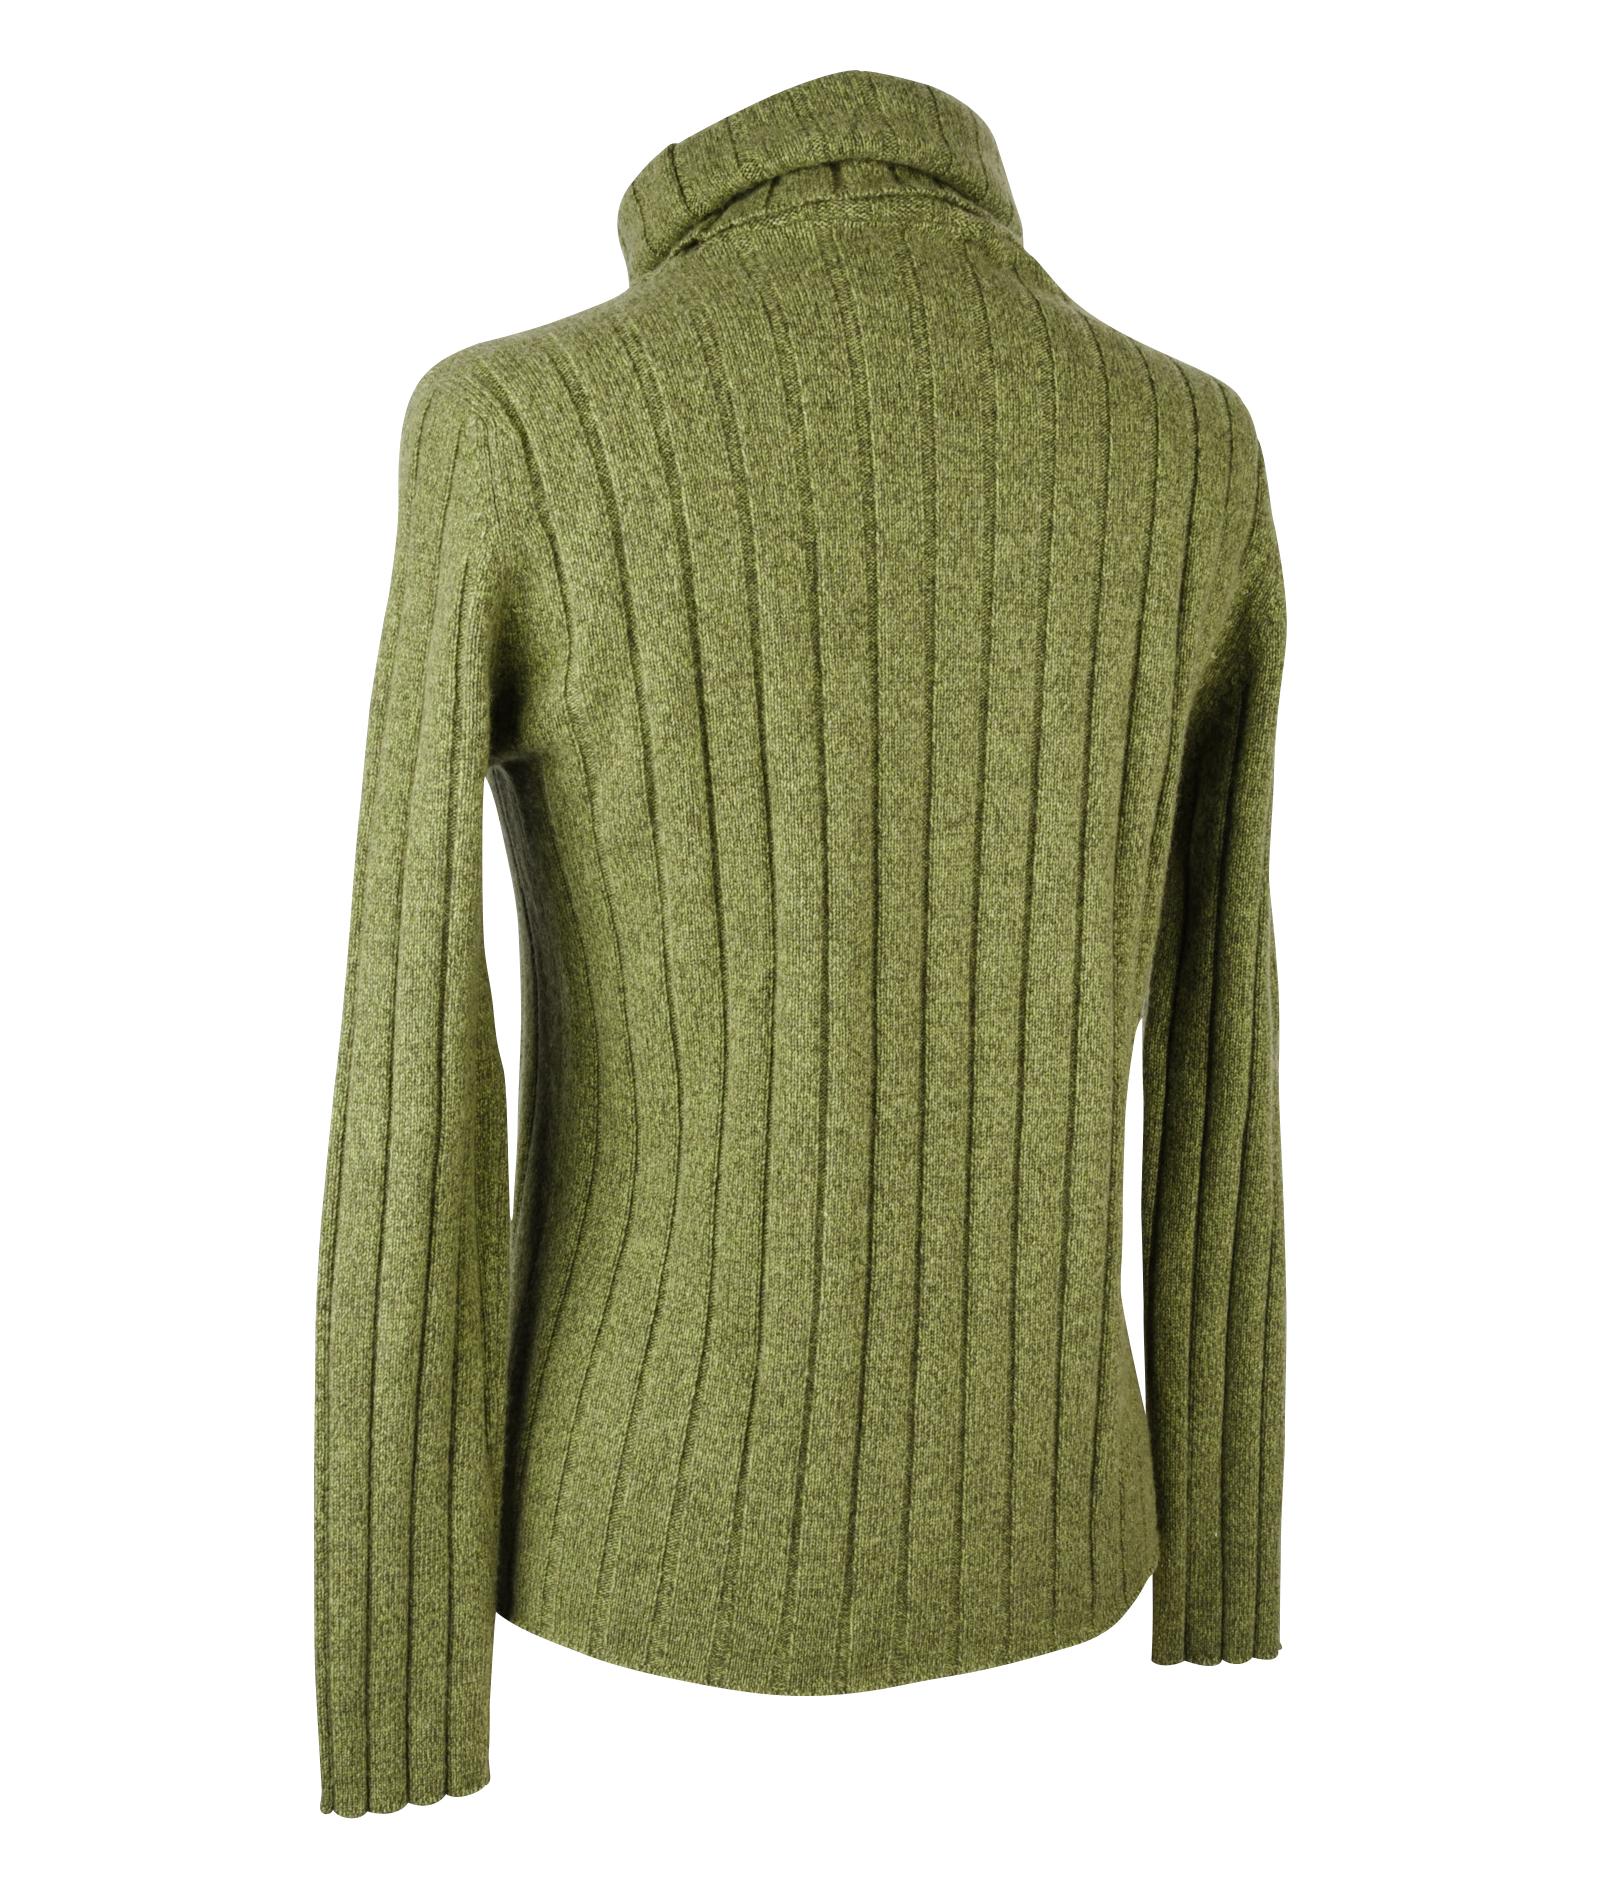 Gray Chanel 97A Sweater Top Turtleneck Cashmere Divine Heathered Green 42 / 8